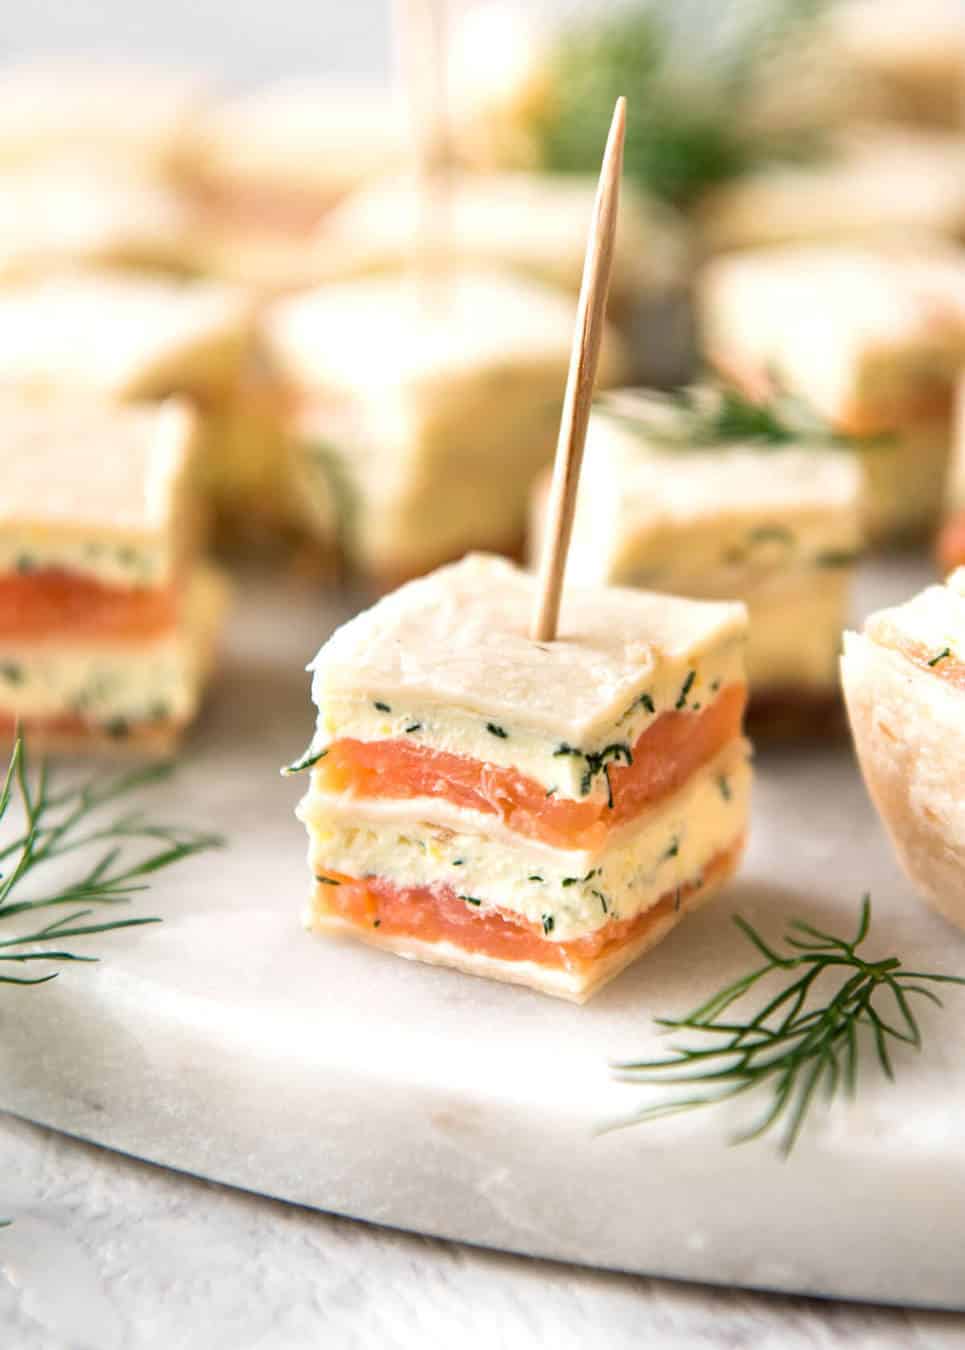 Smoked Salmon Appetizer fantastic for gatherings - no fiddly assembly, served at room temperature, looks elegant and tastes SO GOOD! recipetineats.com